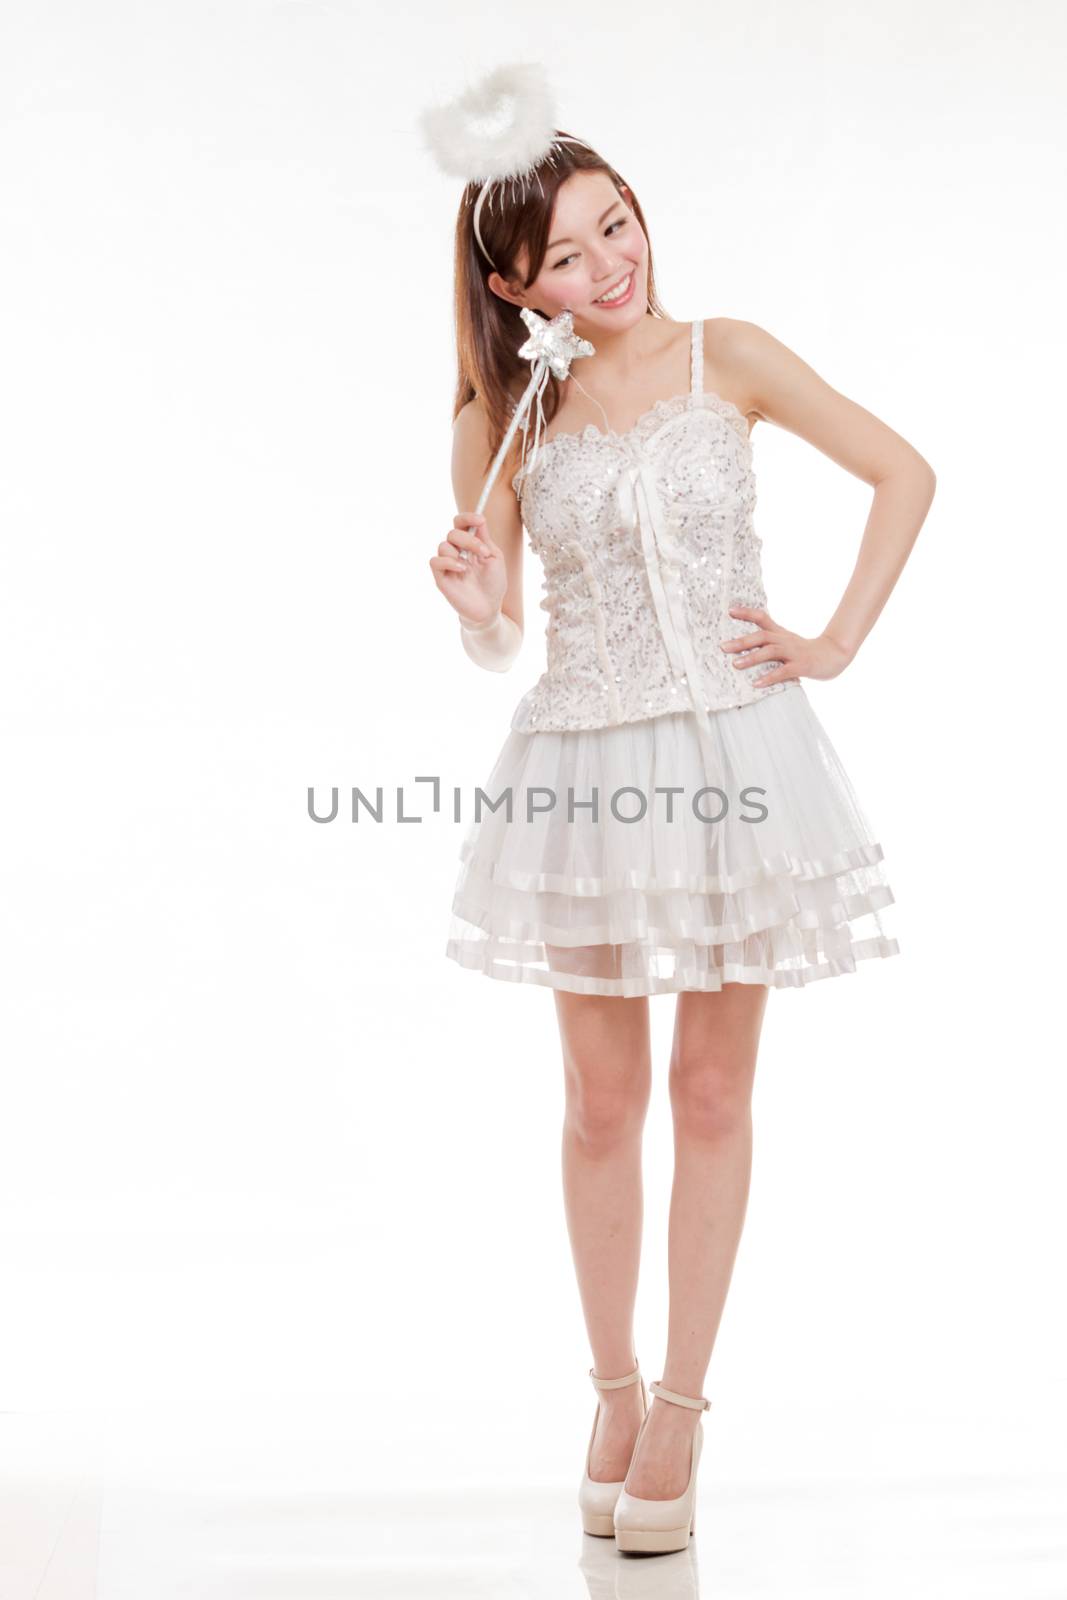 Smiling Asian Woman in White FairyCostume, isolated by imagesbykenny